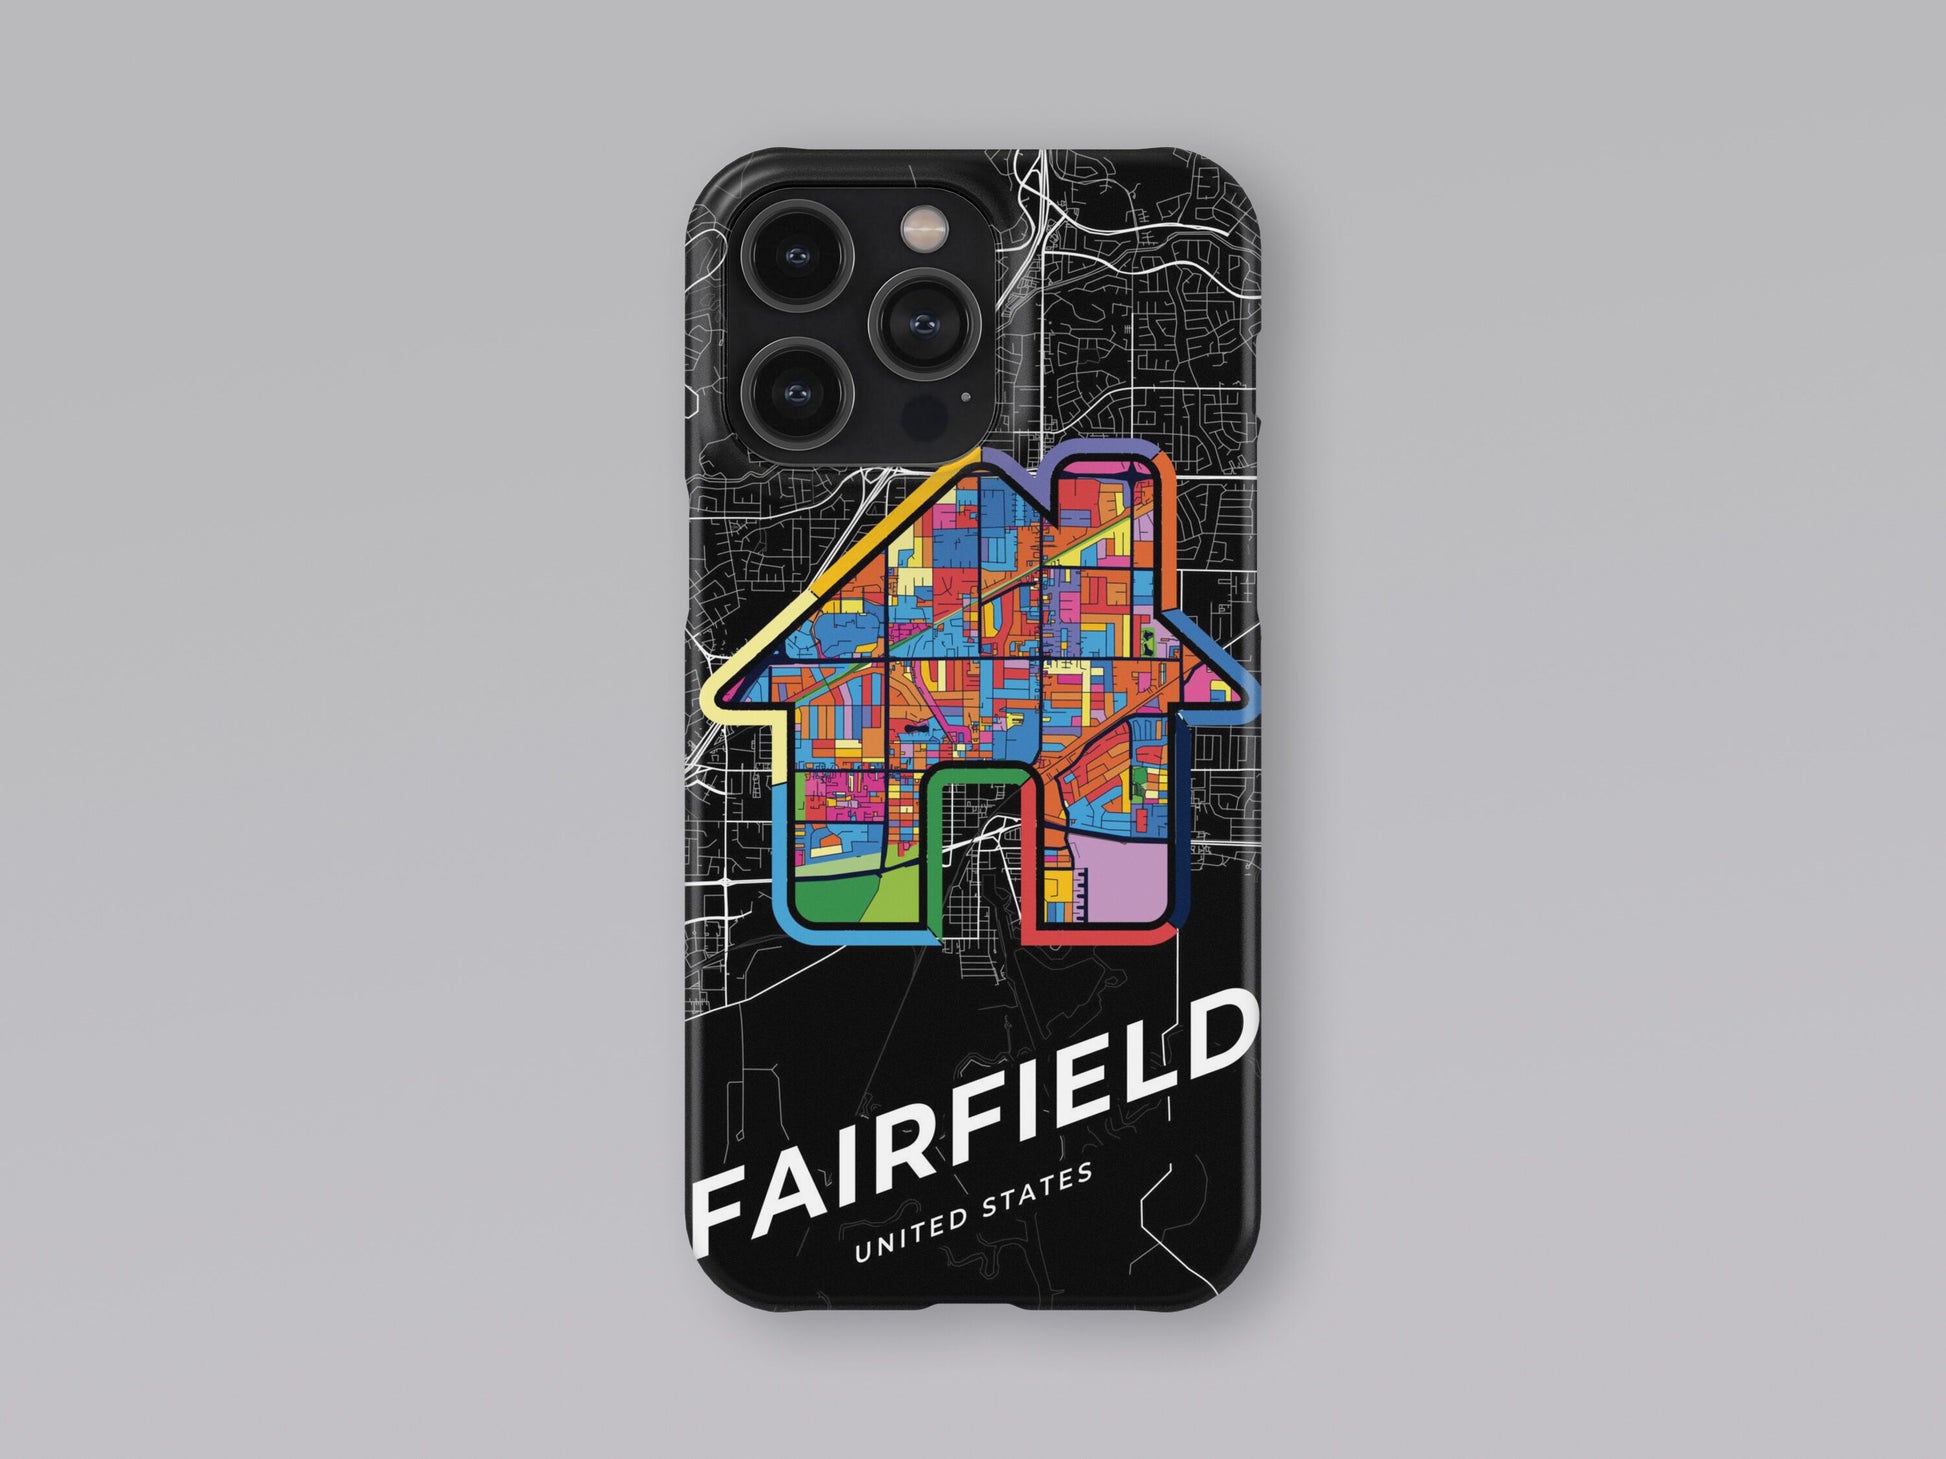 Fairfield California slim phone case with colorful icon. Birthday, wedding or housewarming gift. Couple match cases. 3